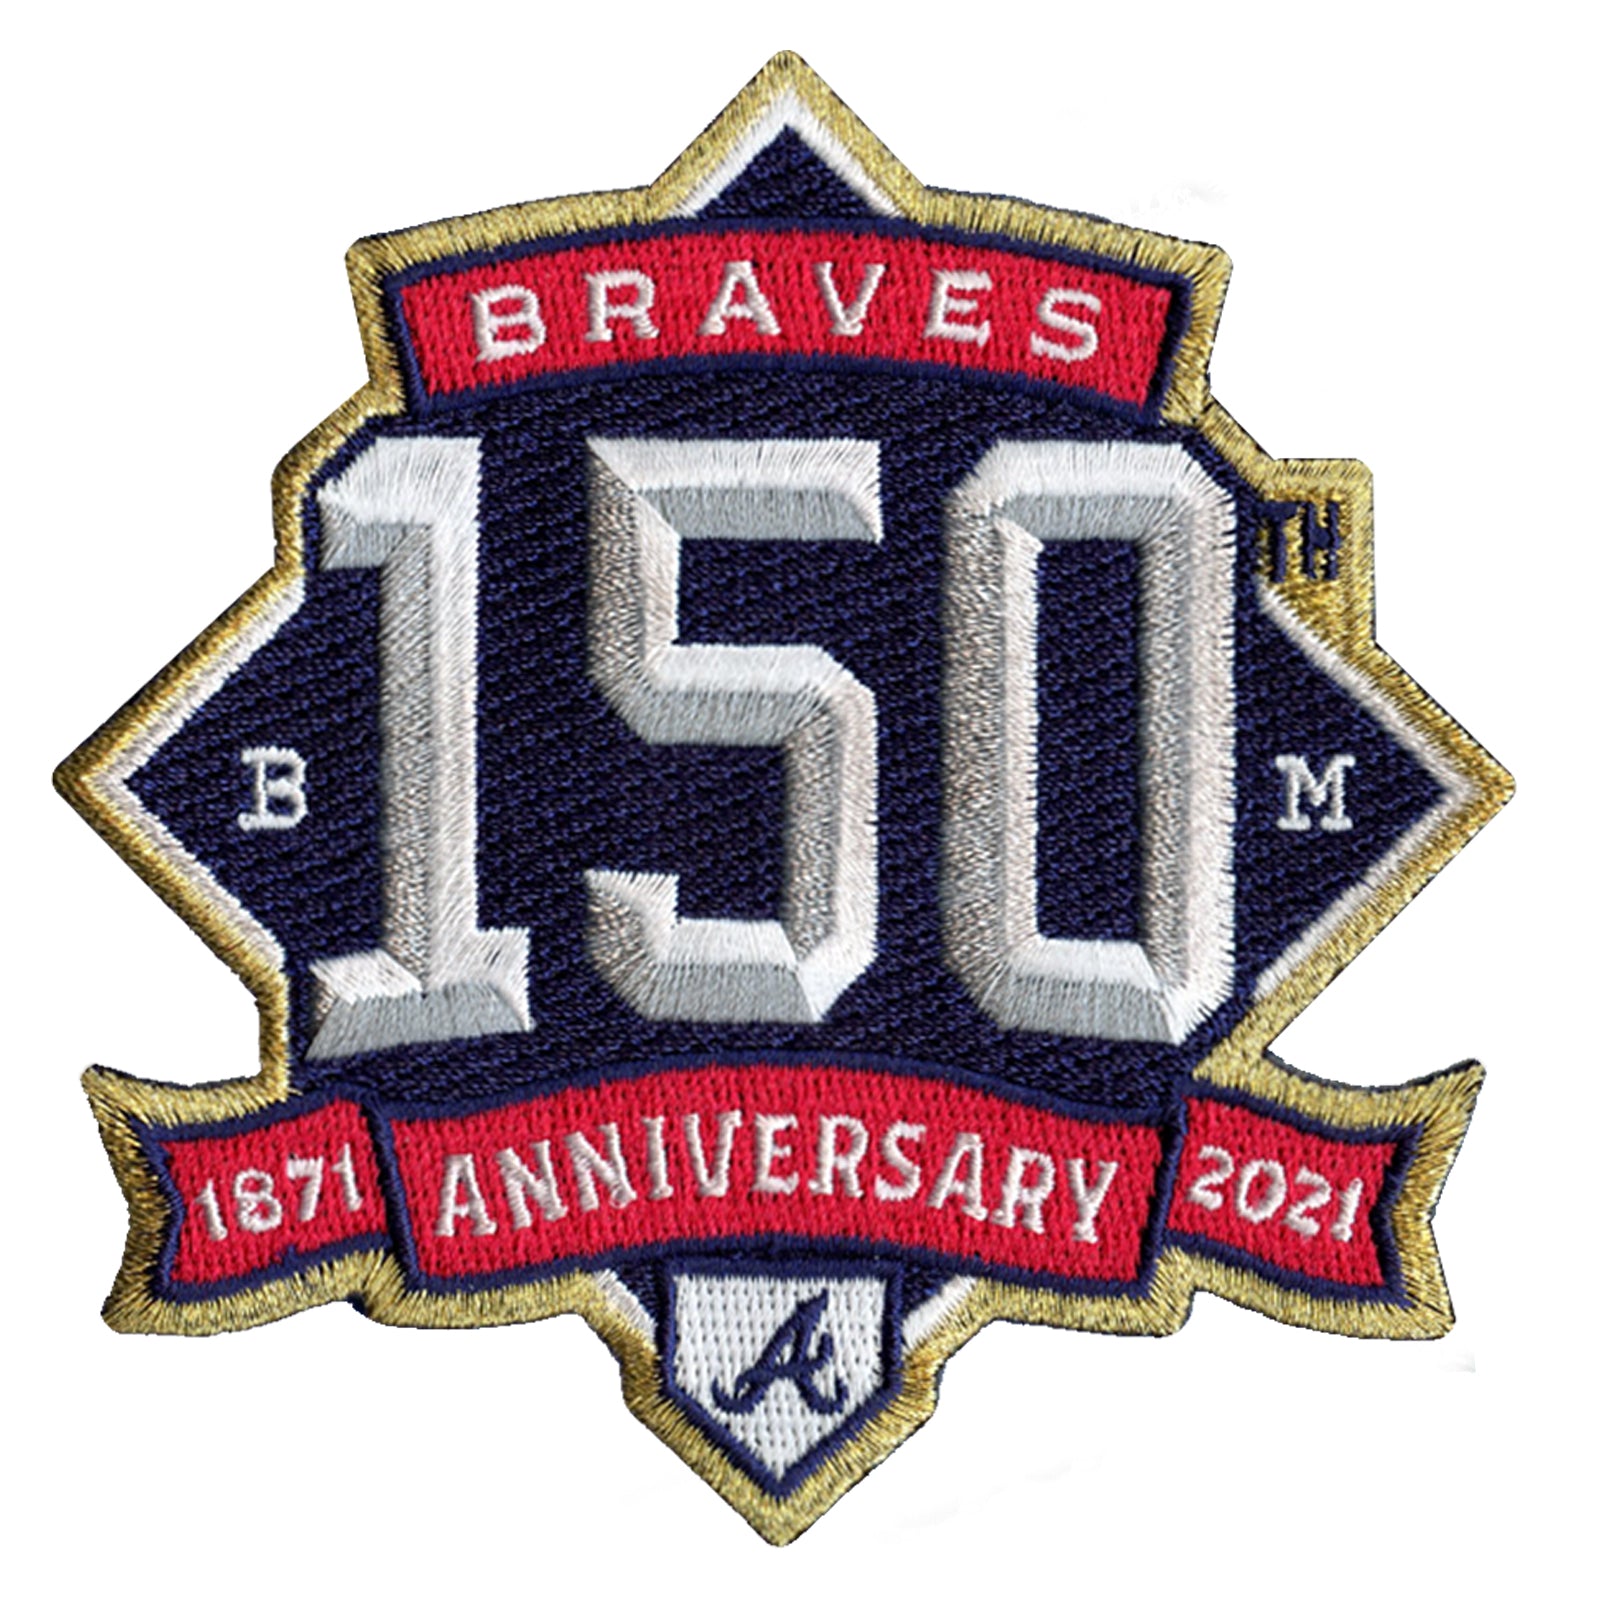 MLB unveils 150th anniversary patch to be worn on uniforms